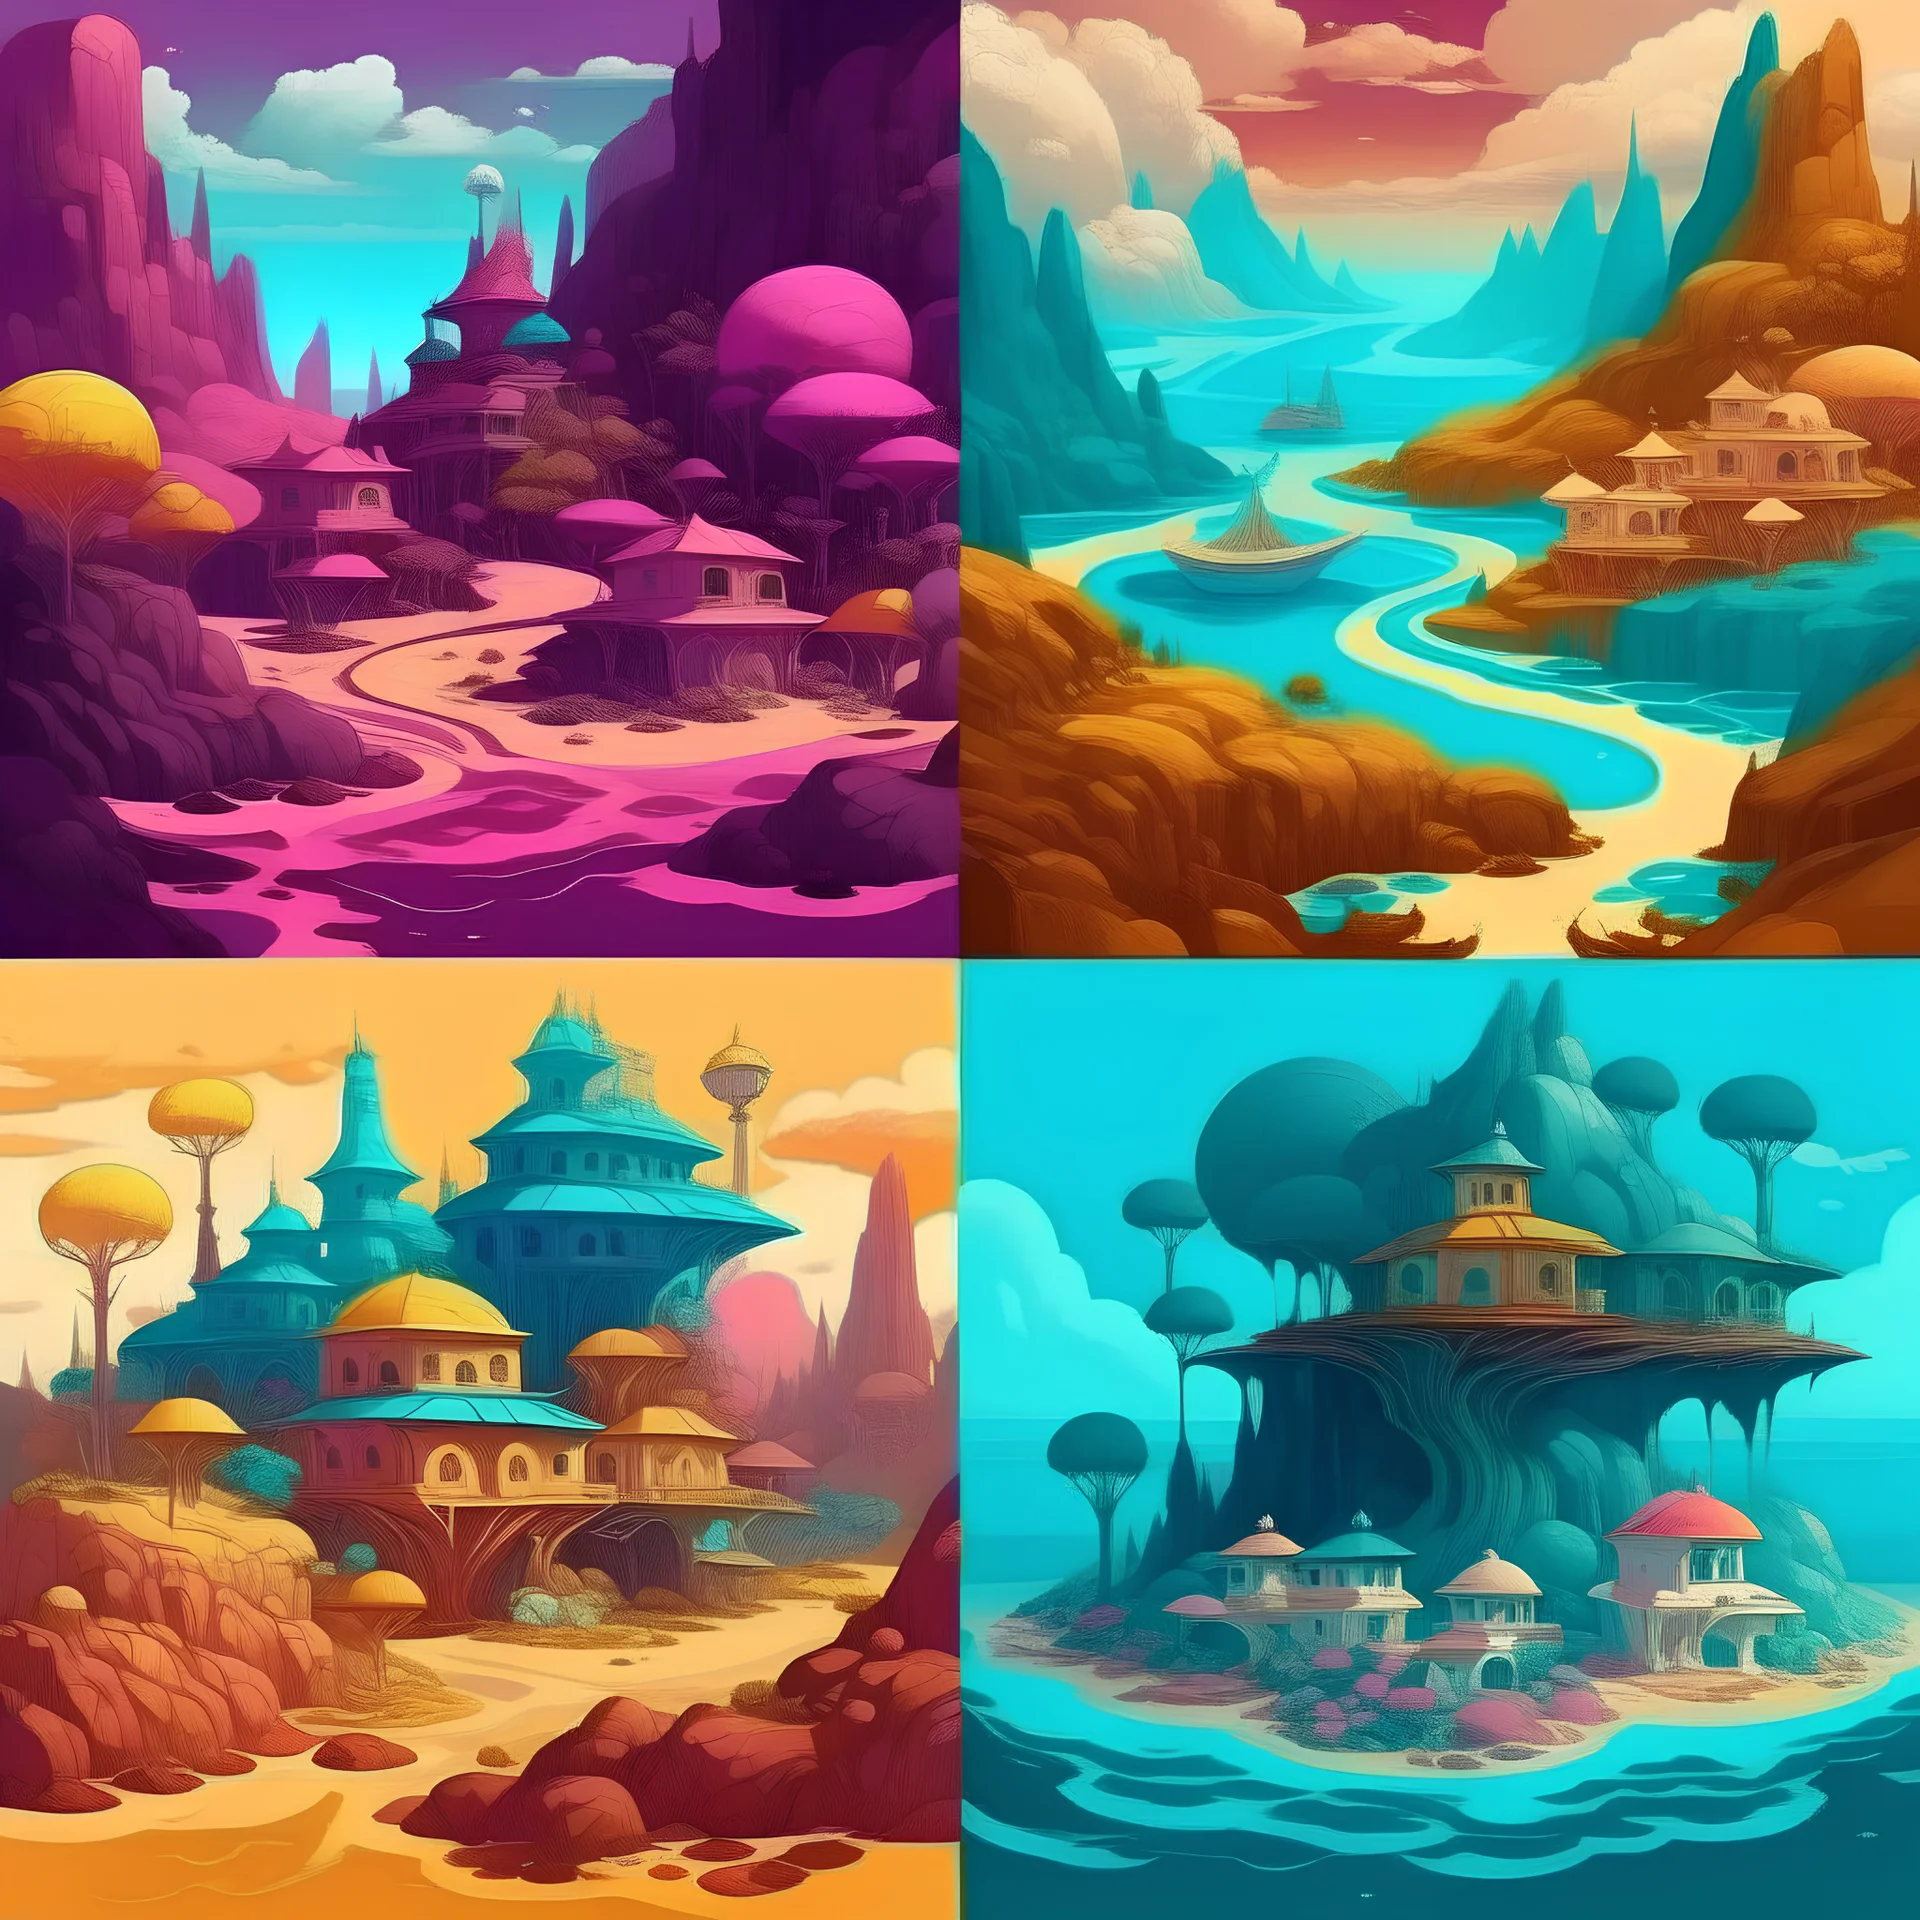 COLOR PALETTE for Dreamscape: Design surreal landscapes or dreamscapes filled with surreal elements like floating islands, surreal creatures, and unusual architecture.